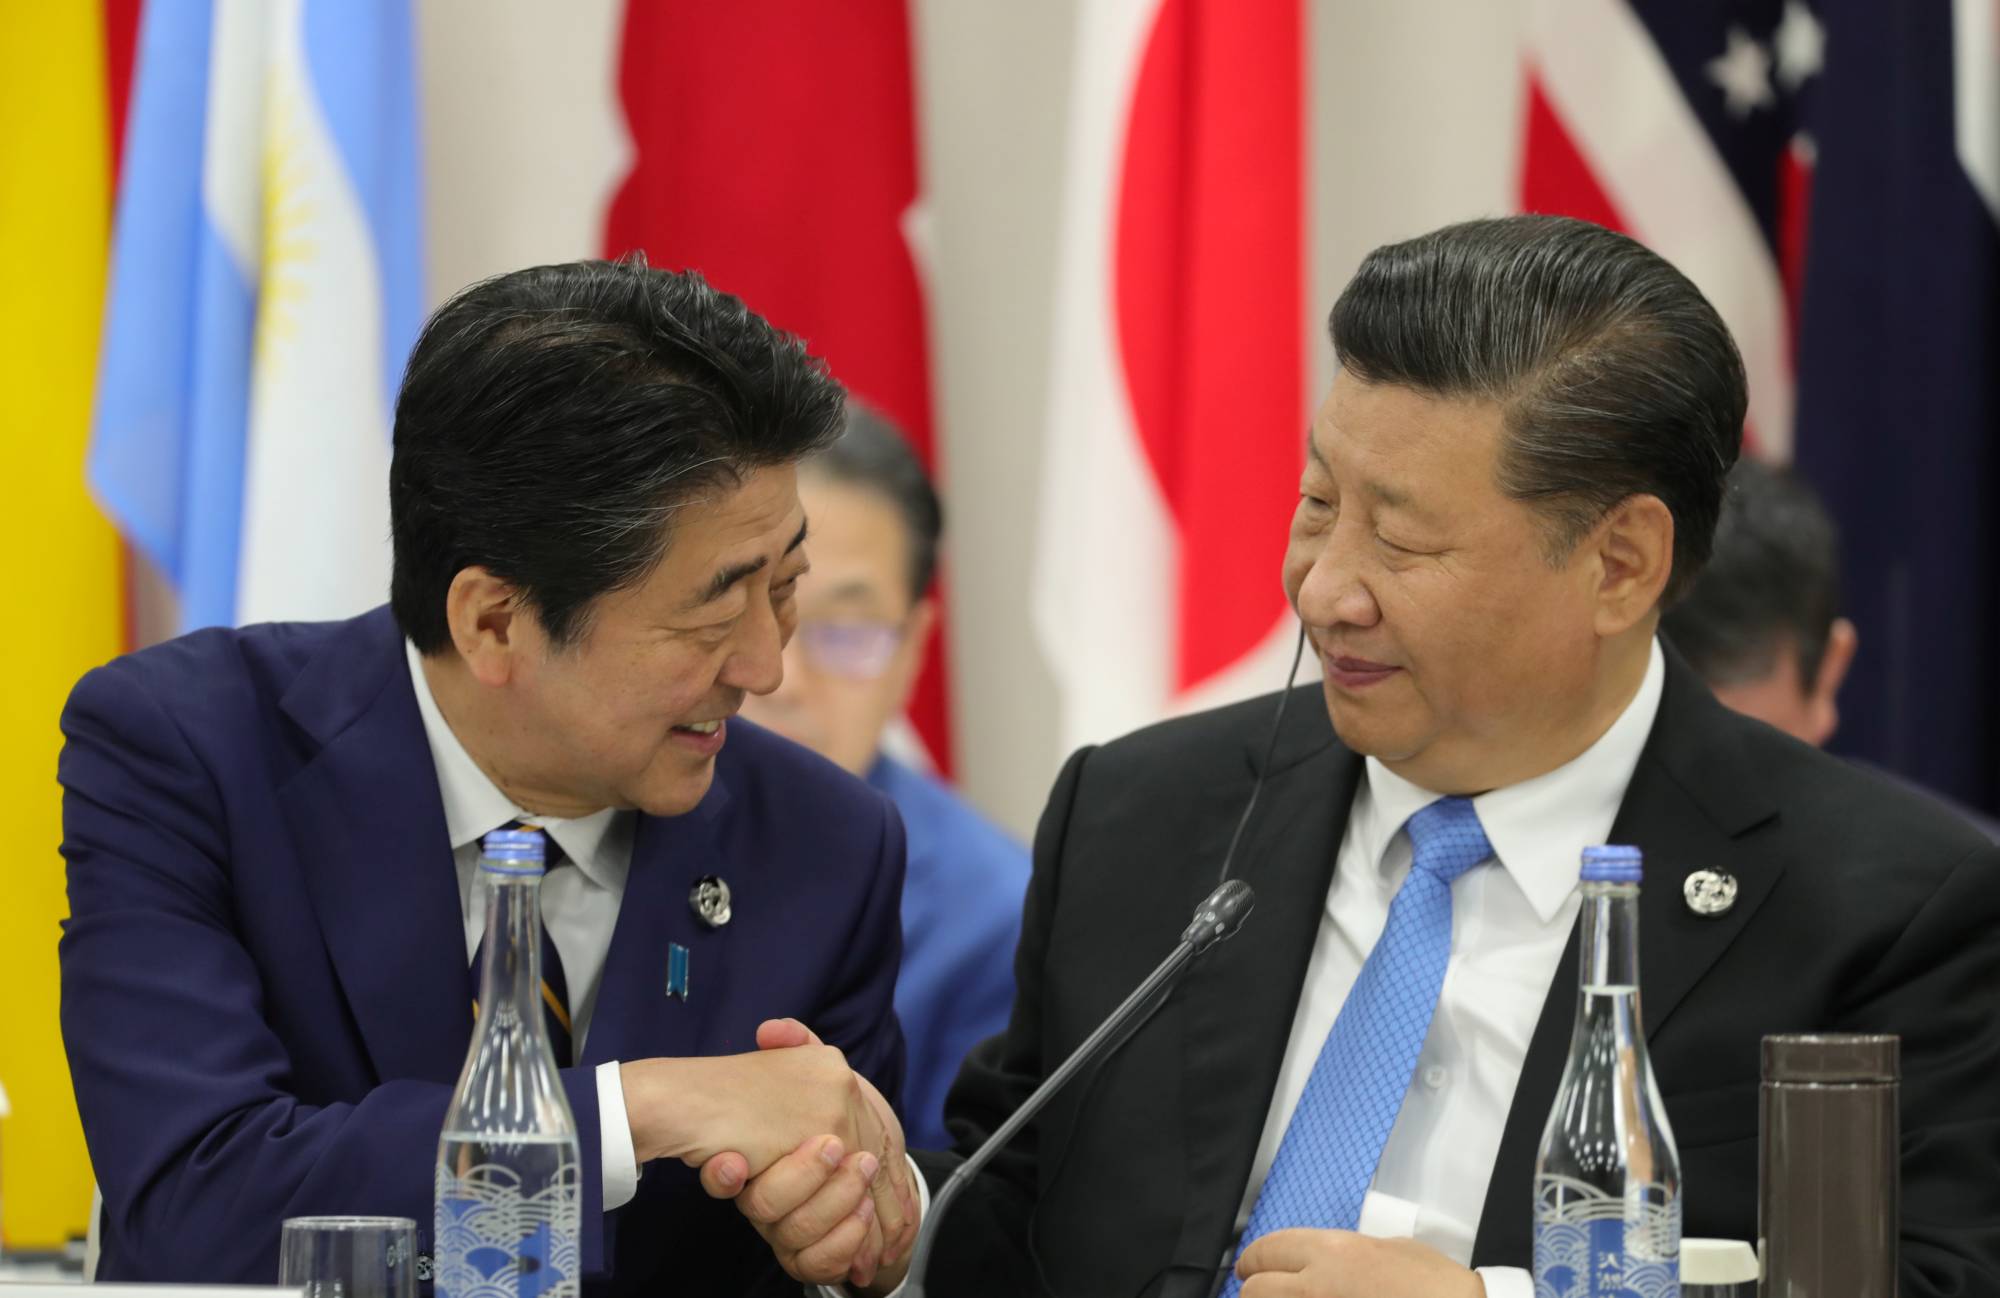 Prime Minister Shinzo Abe shakes hands with Chinese leader Xi Jinping during a G20 summit in Osaka in June 2019. | SPUTNIK / KREMLIN / VIA REUTERS